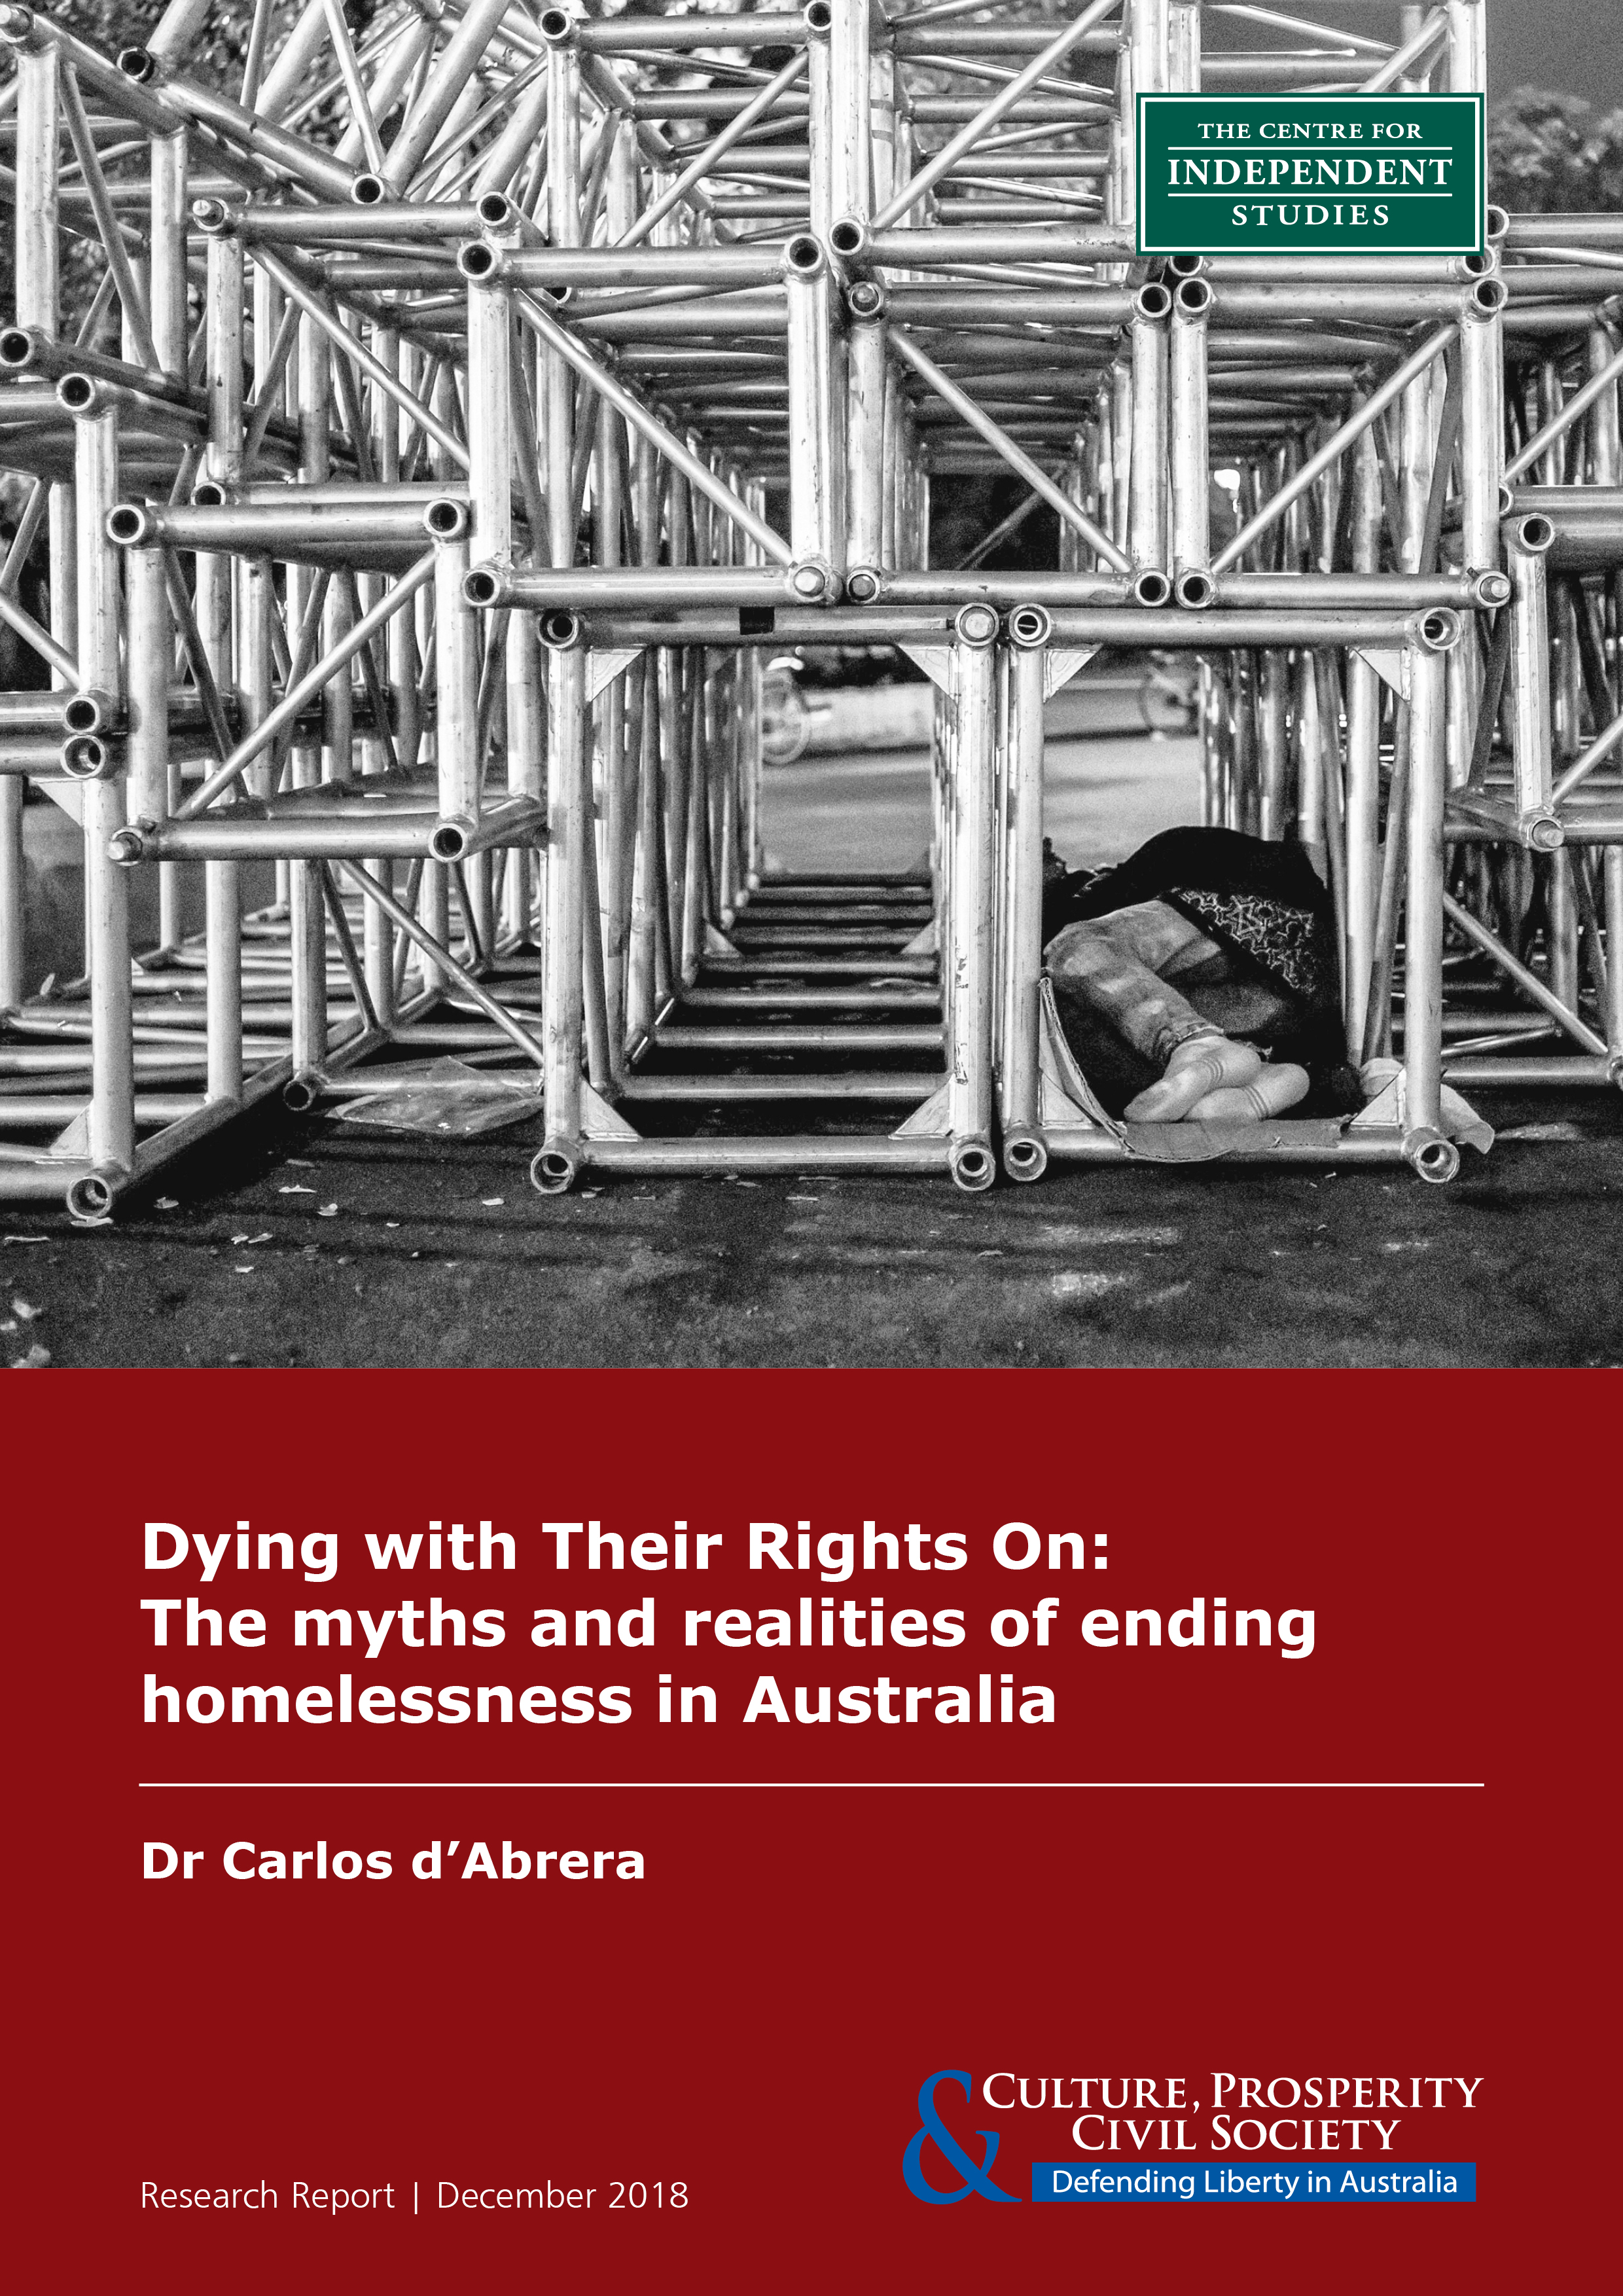 Dying with Their Rights On:  The myths and realities of ending homelessness in Australia